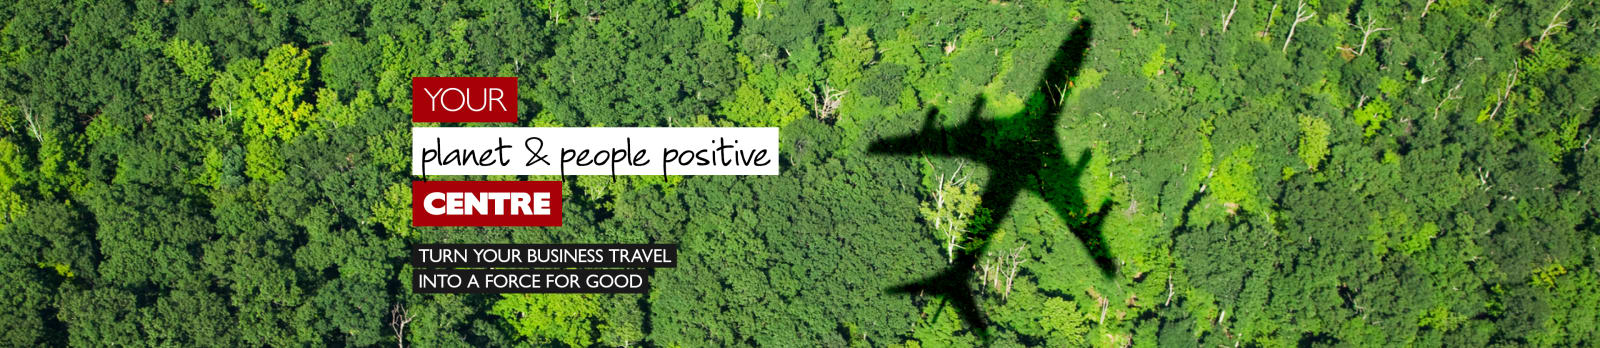 Your planet & people positive centre - turn your business travel into a force for good. Shadow of a plane flying over a lush forest